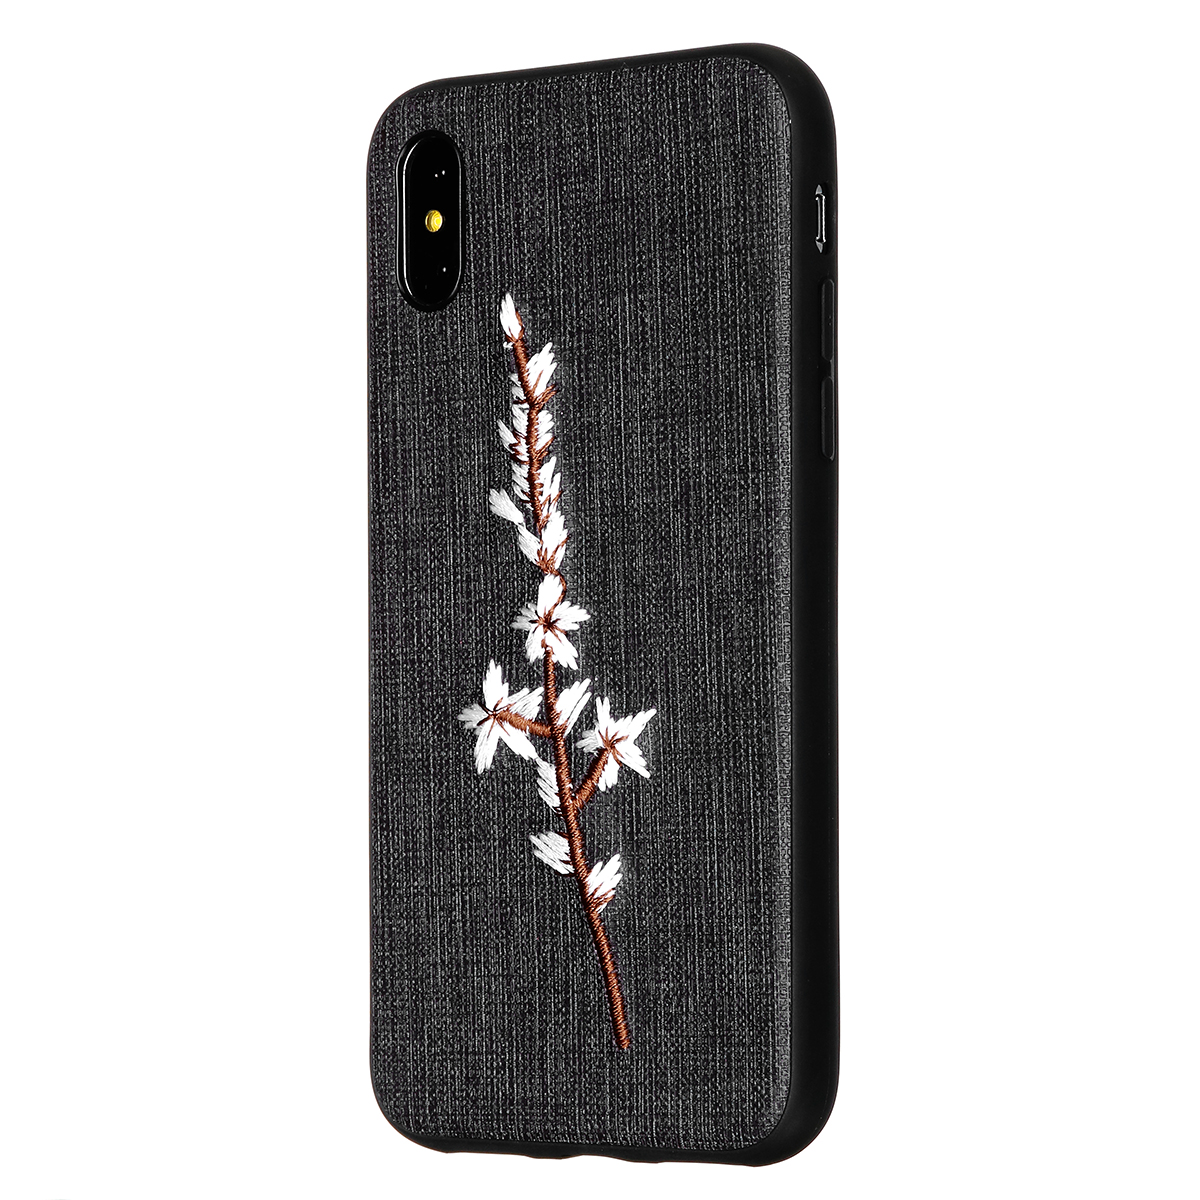 AUGIENB-Embroidery-Cloth-Shockproof-Protective-Case-For-iPhone-XXS88-Plus77-Plus6s6s-Plus-1397766